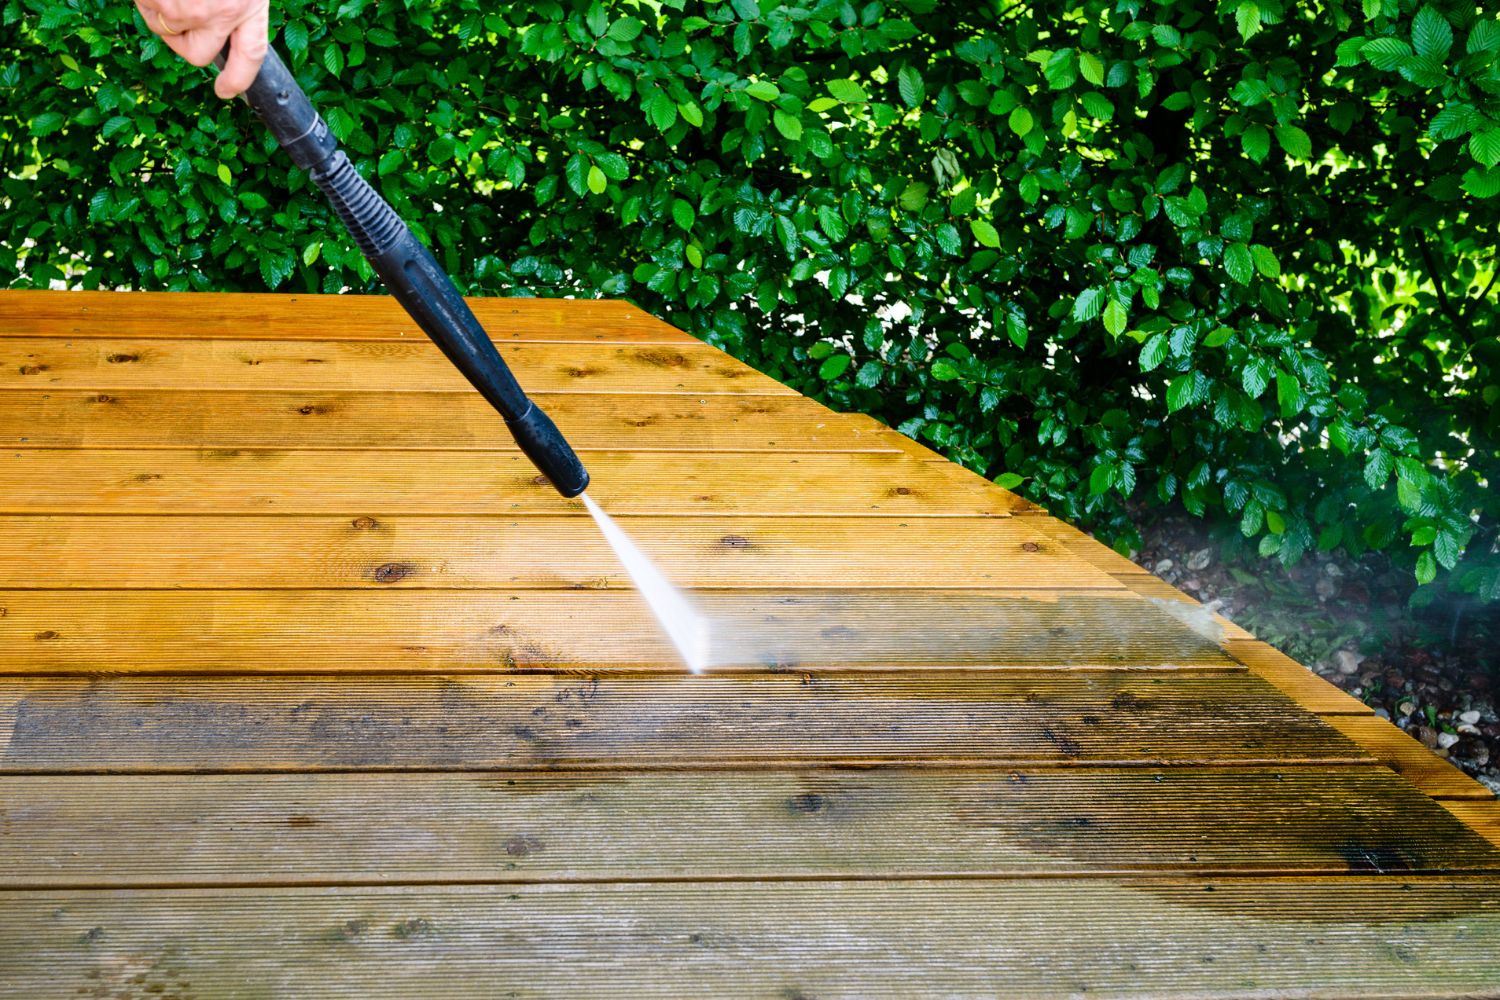 Patio & Deck Cleaning